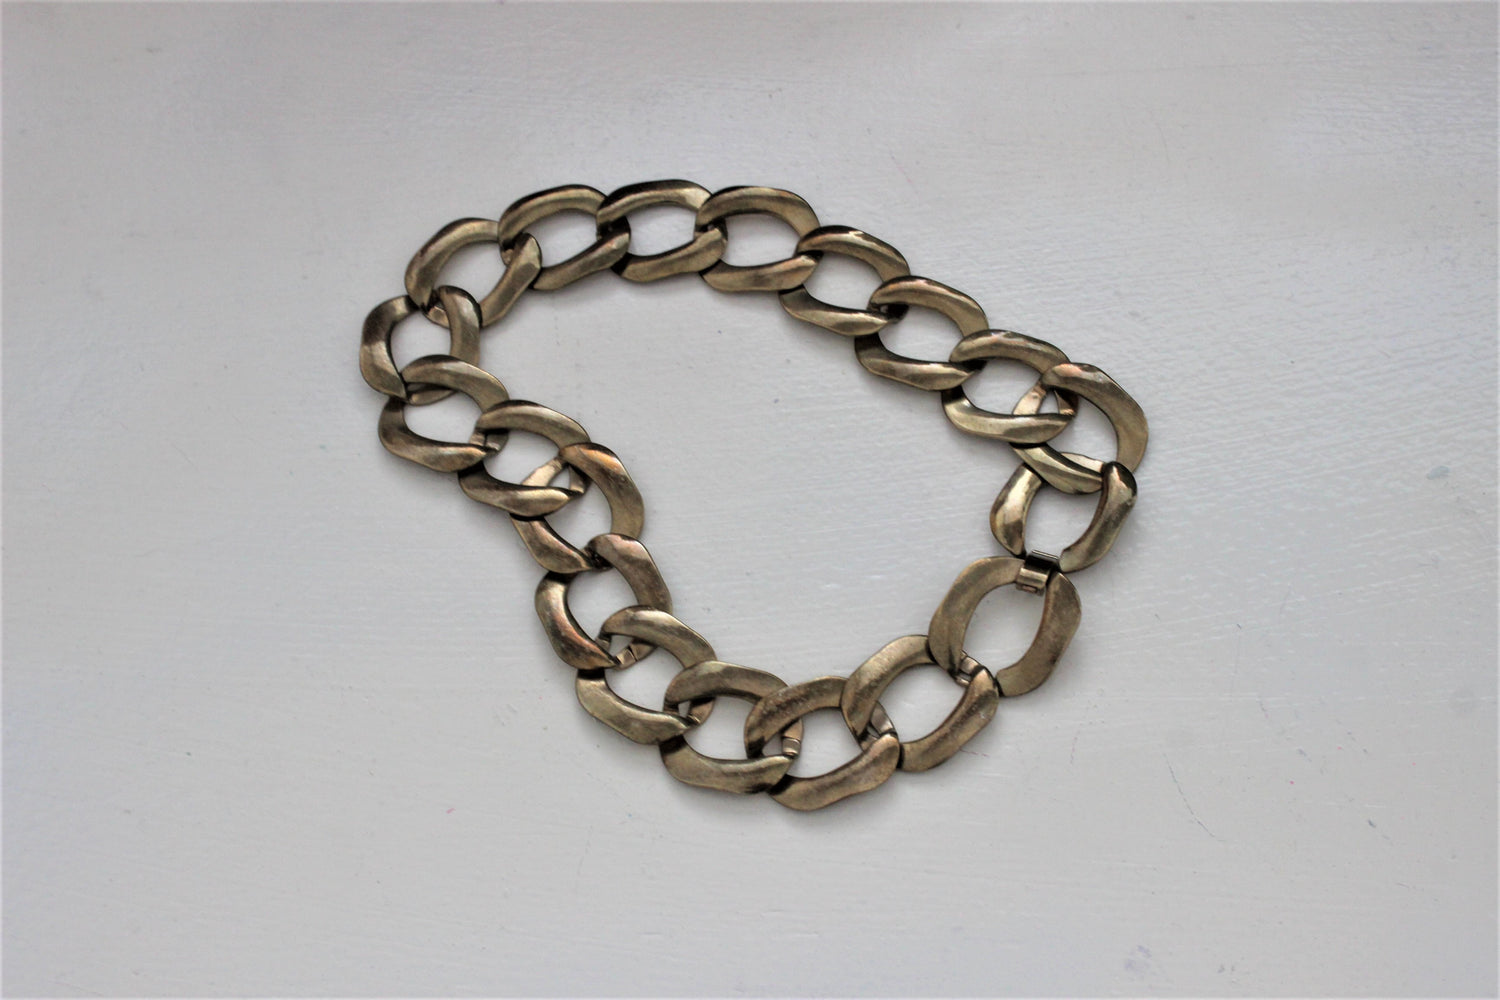 Vintage 1960s 1970s Gold Chain Choker